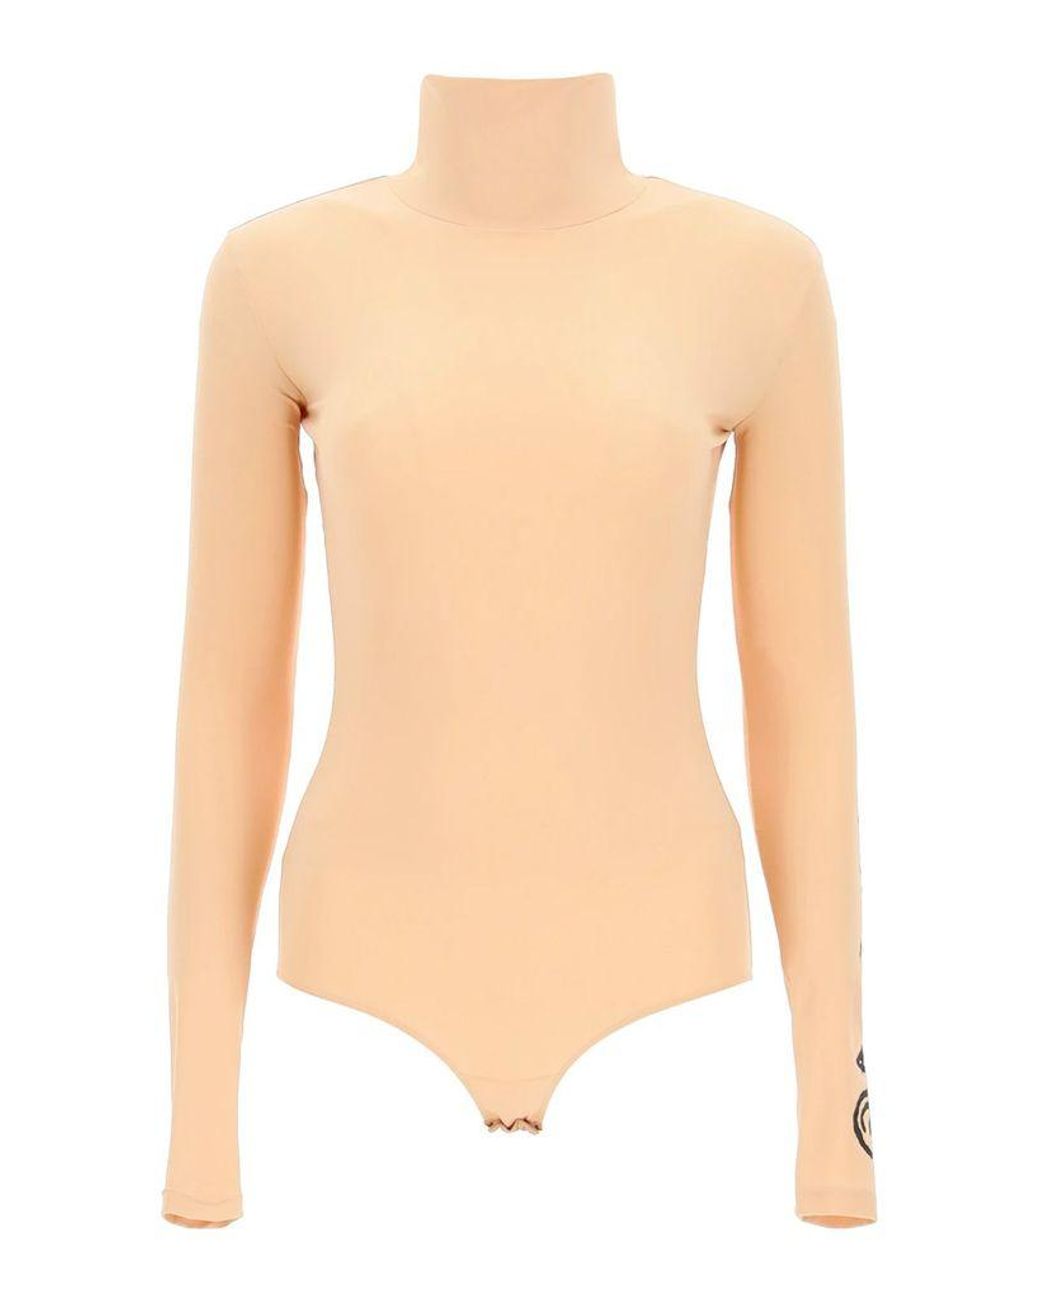 Maison Margiela Synthetic Bodysuit in Pink - Save 25% - Lyst